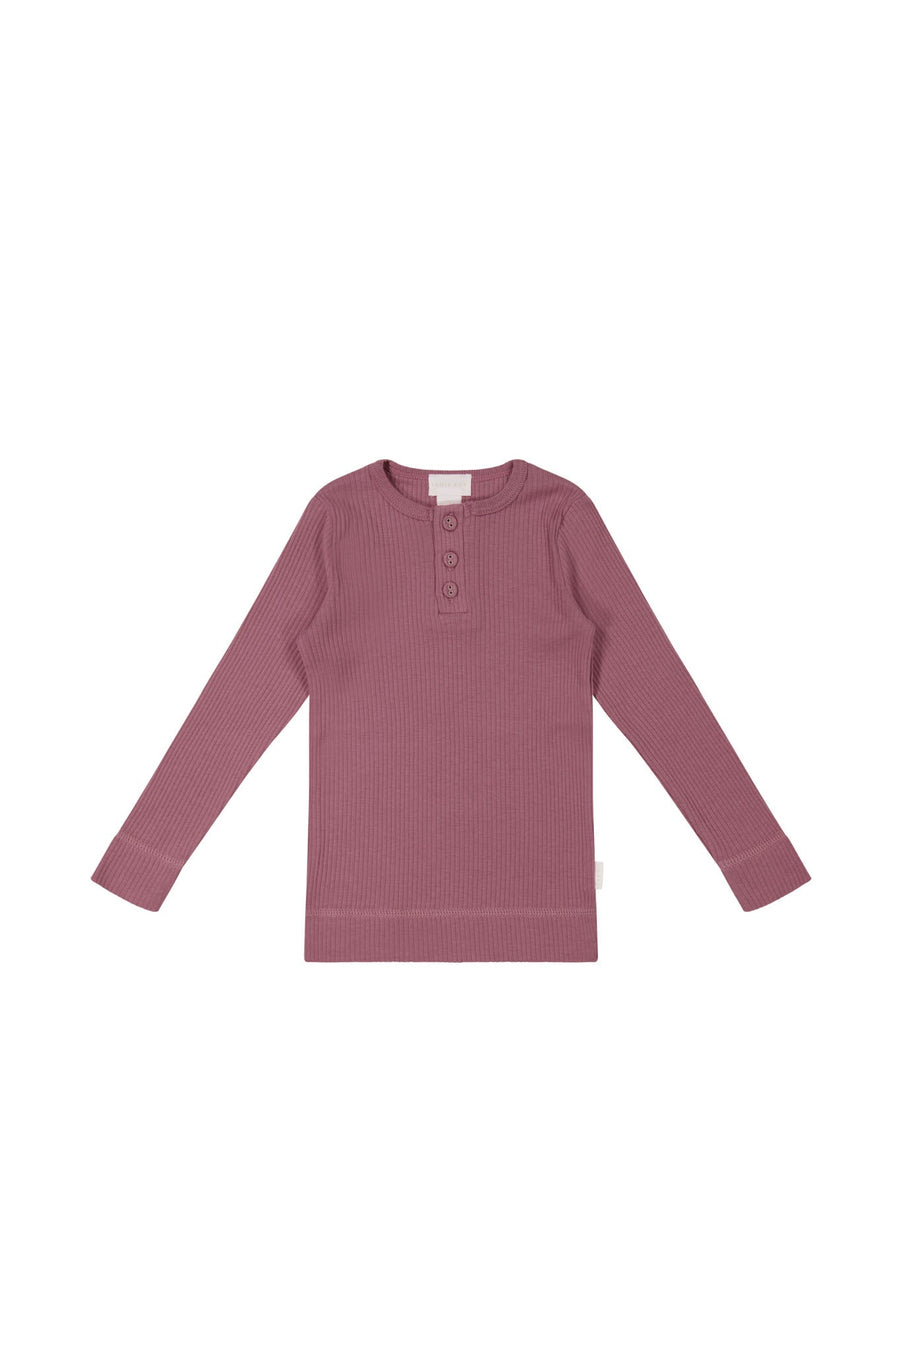 Organic Cotton Modal Long Sleeve Henley - Rosette Childrens Top from Jamie Kay USA